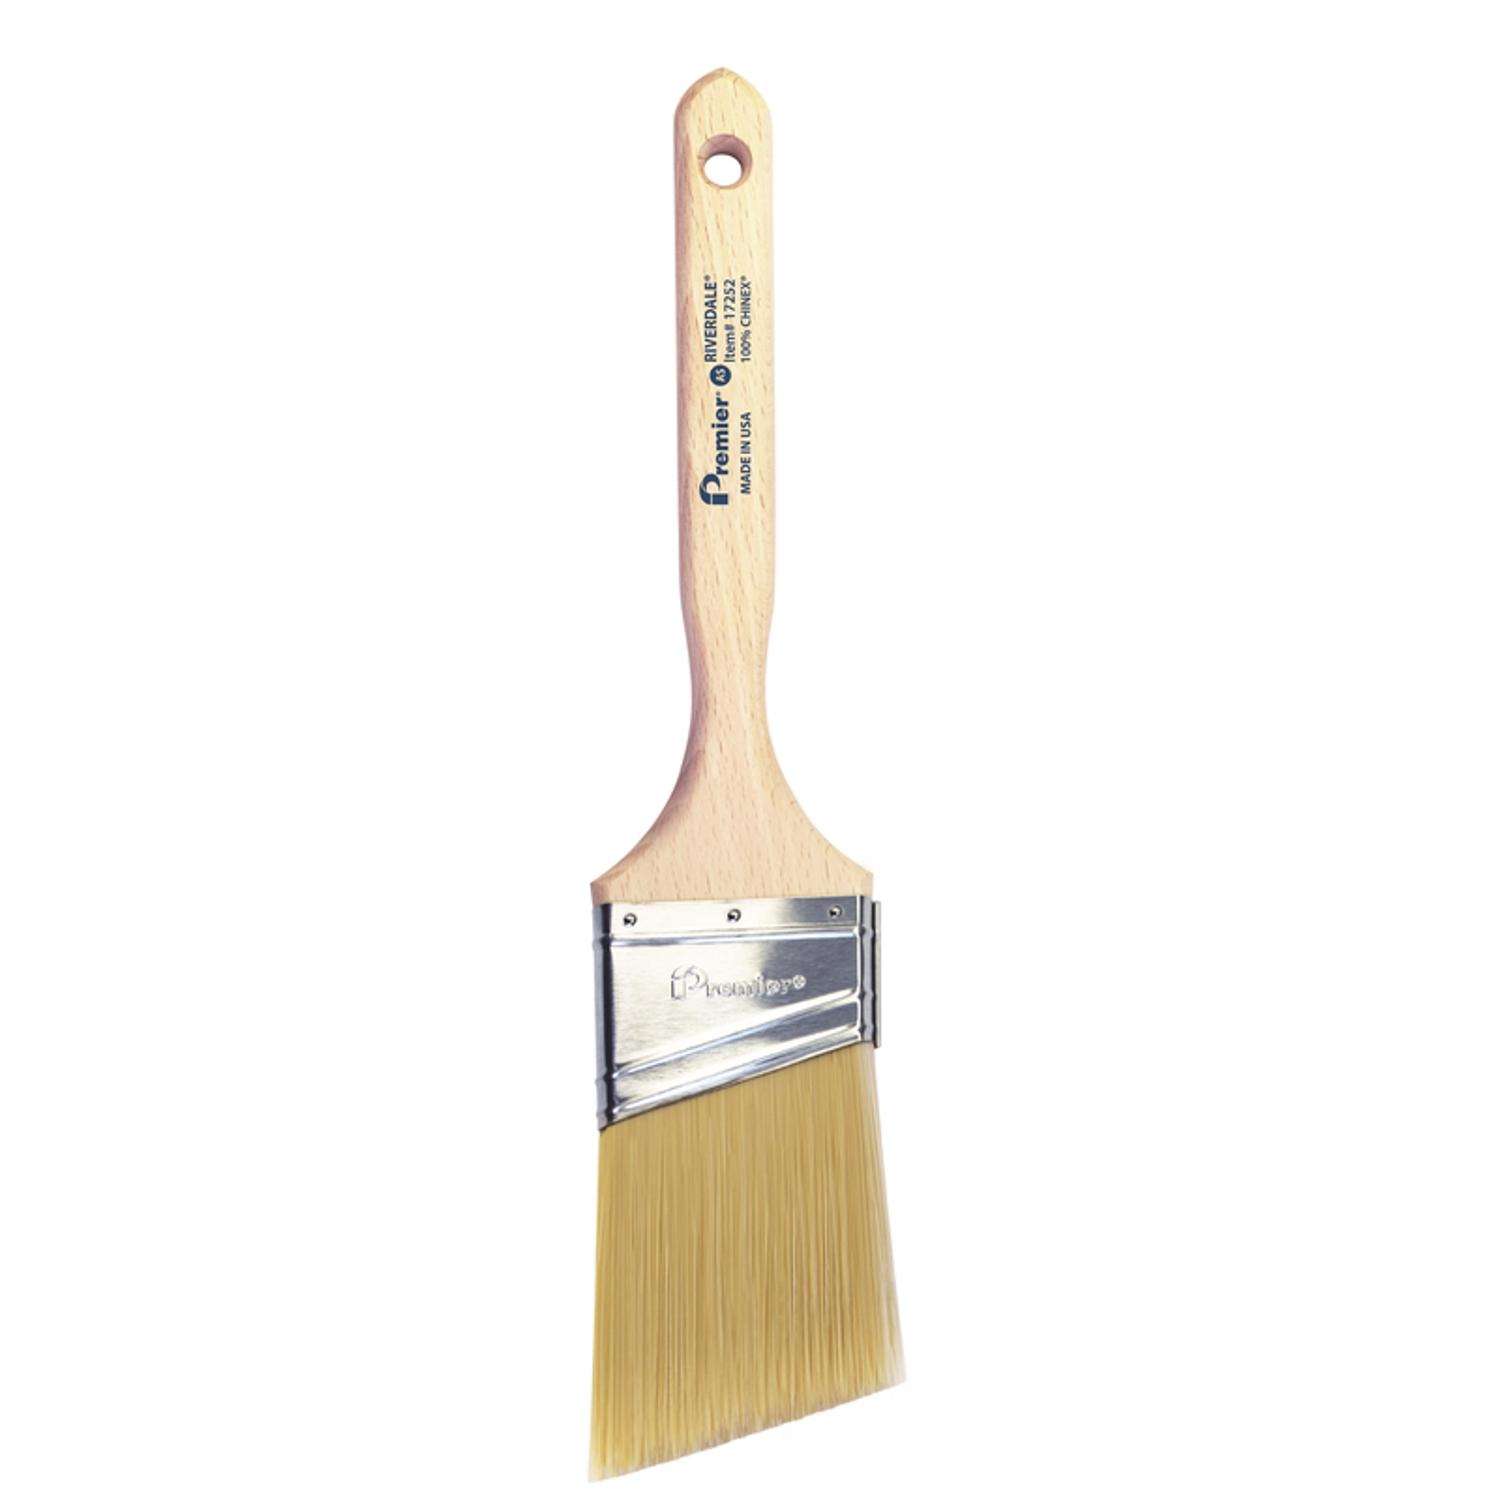 Riverdale Chinex Angle Sash Paint Brush, Extra Firm, 3-In.